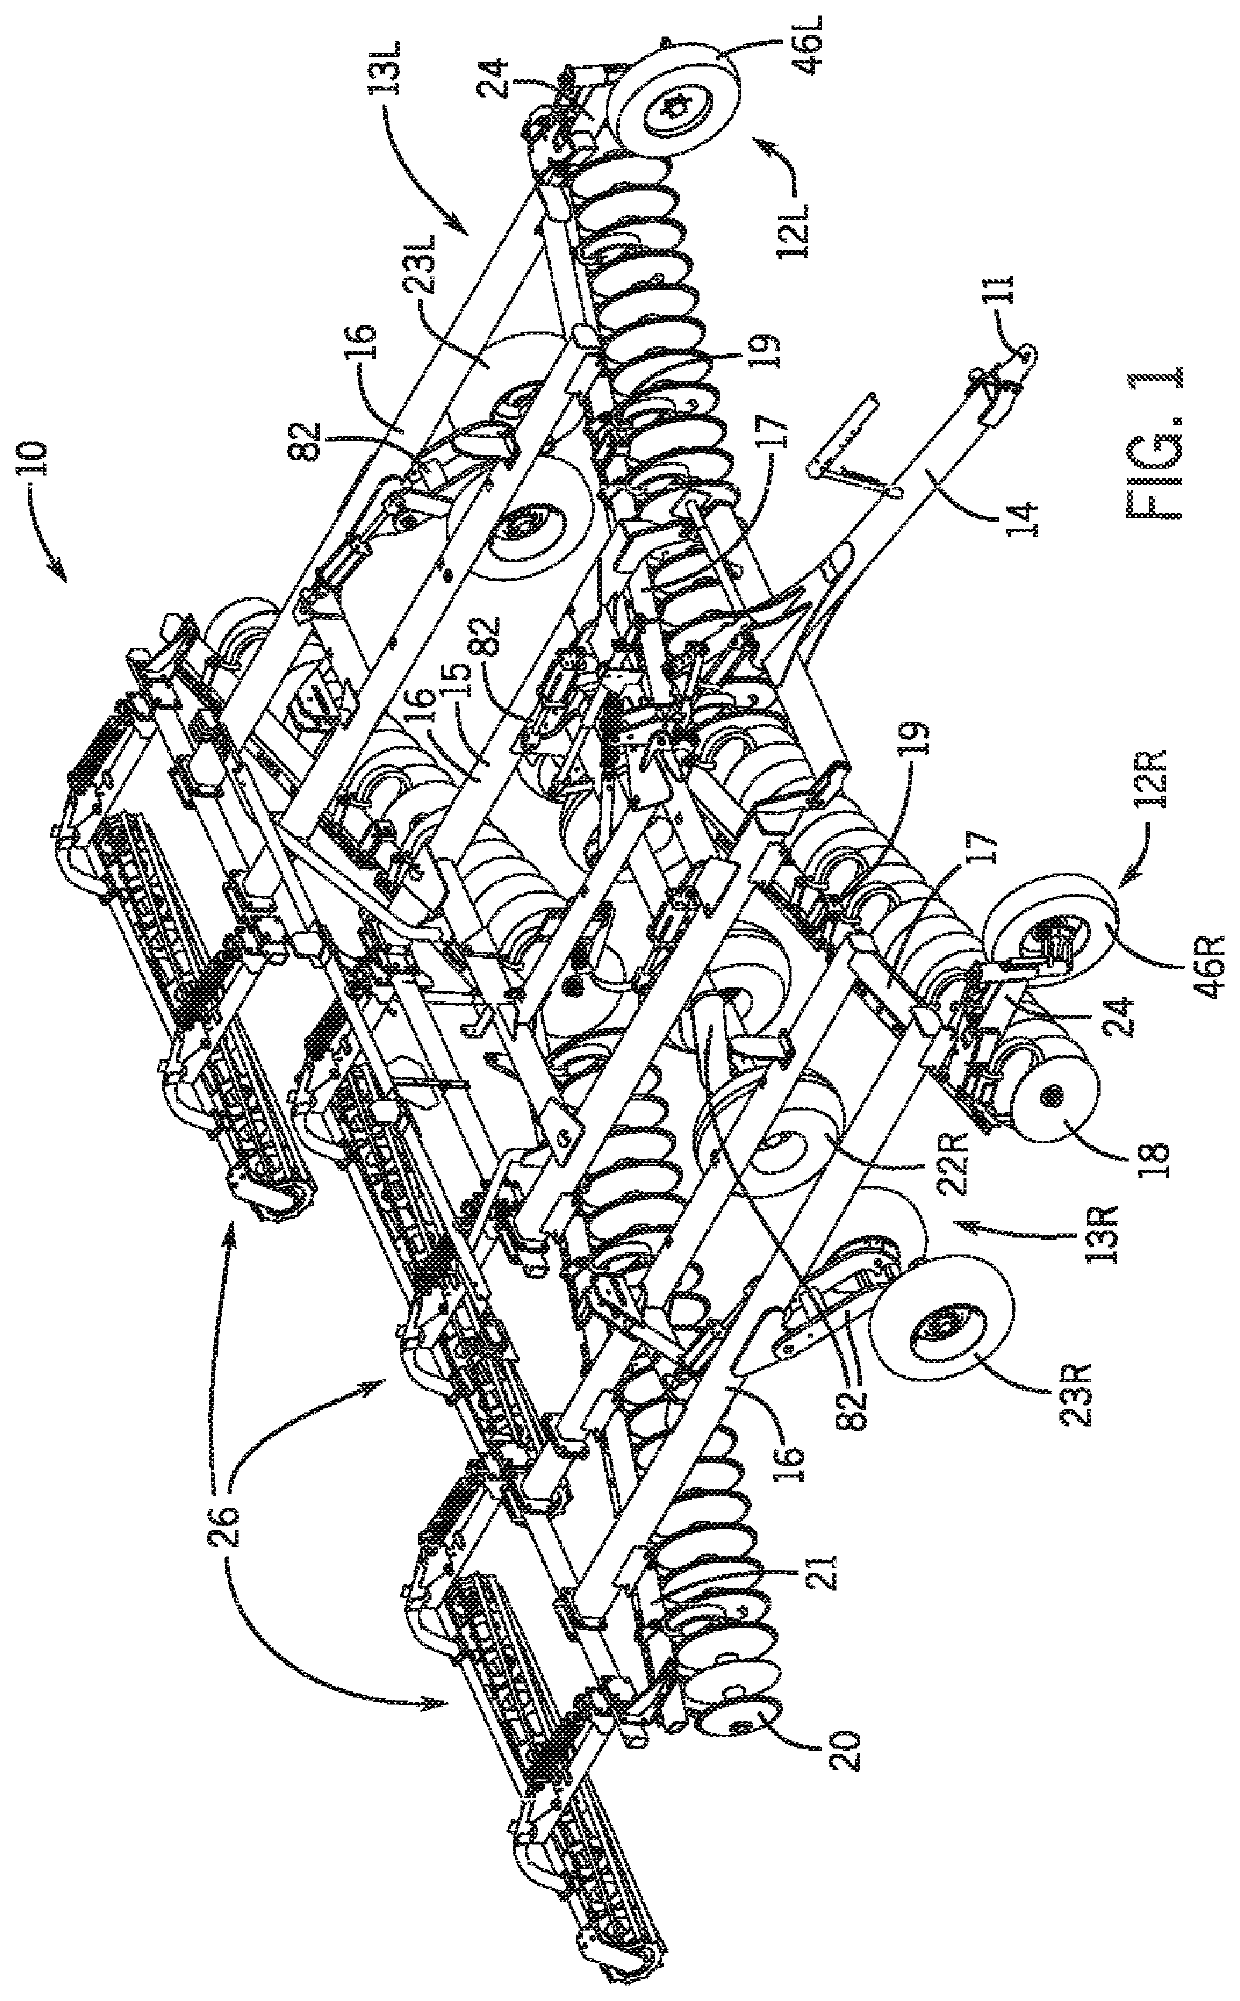 Remote hydraulic actuation and positioning of a plurality of implement stabilizer wheels